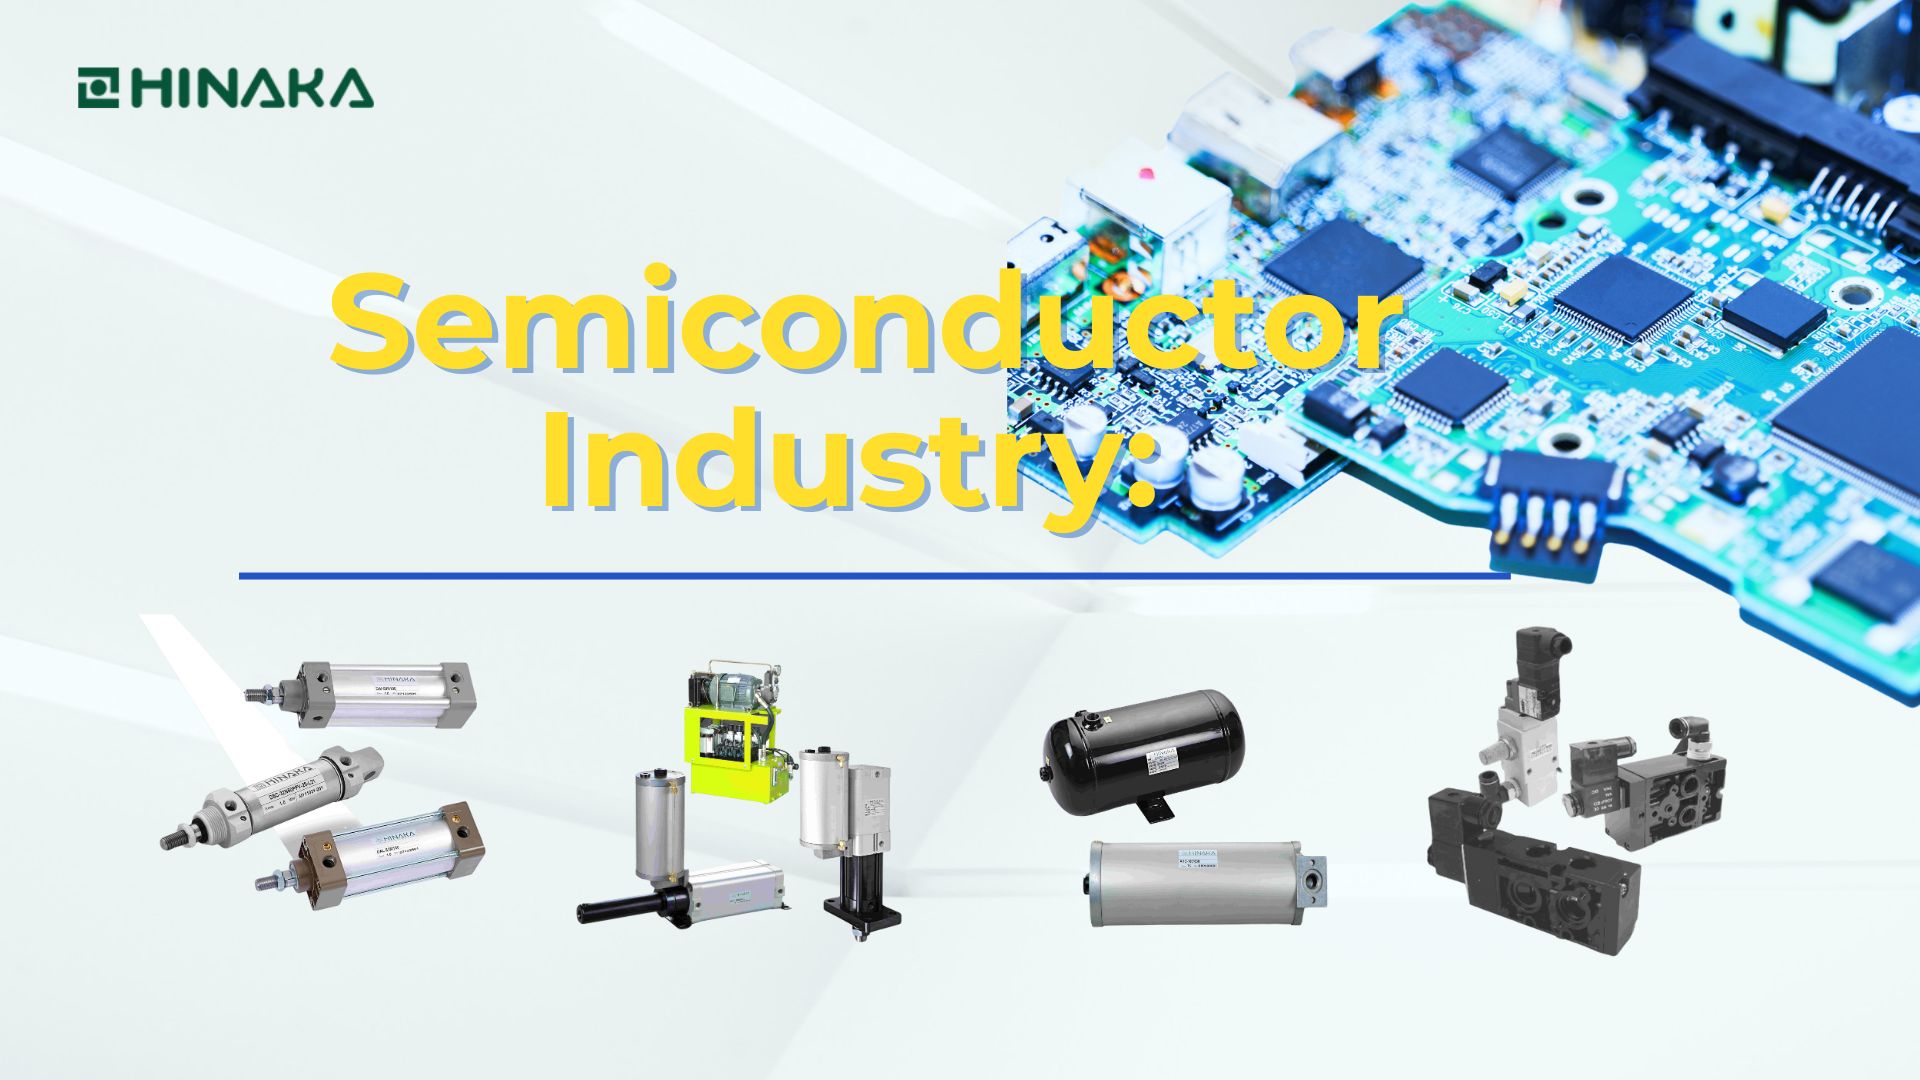 Enhancing Precision in the Semiconductor Industry: Hinaka's Pneumatic and Hydraulic Solutions